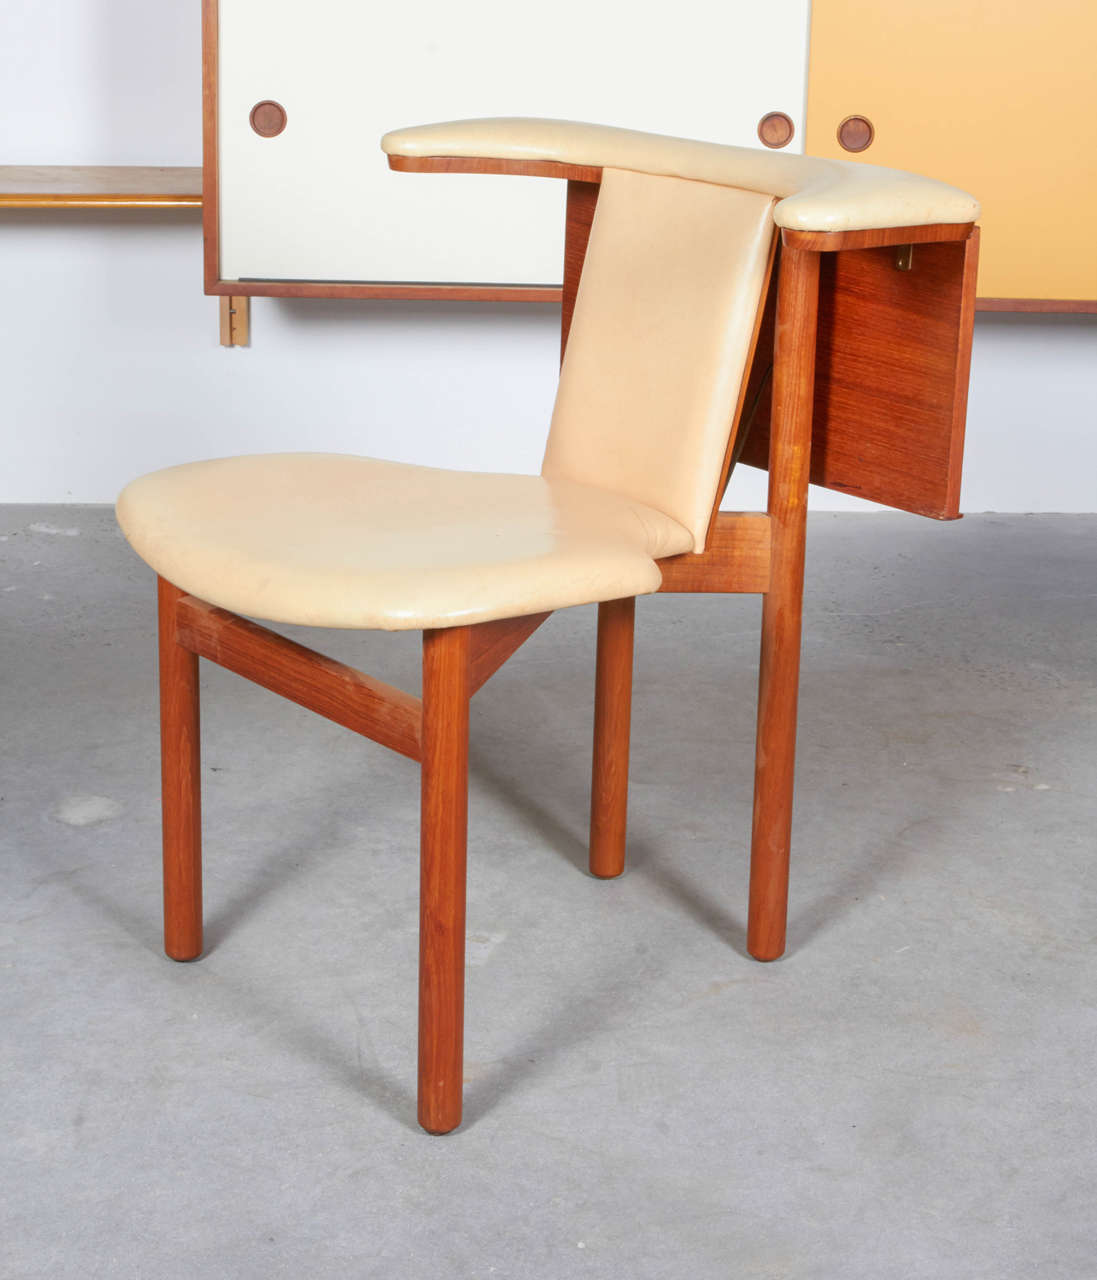 Vintage 1960s Teak Occasional Chair by Hans Olsen  

King Frederik of Denmark was known for occasionally sitting backwards on a chair in a common manner. This wonderful design provides arm support and a diminutive desk capable of supporting a pad